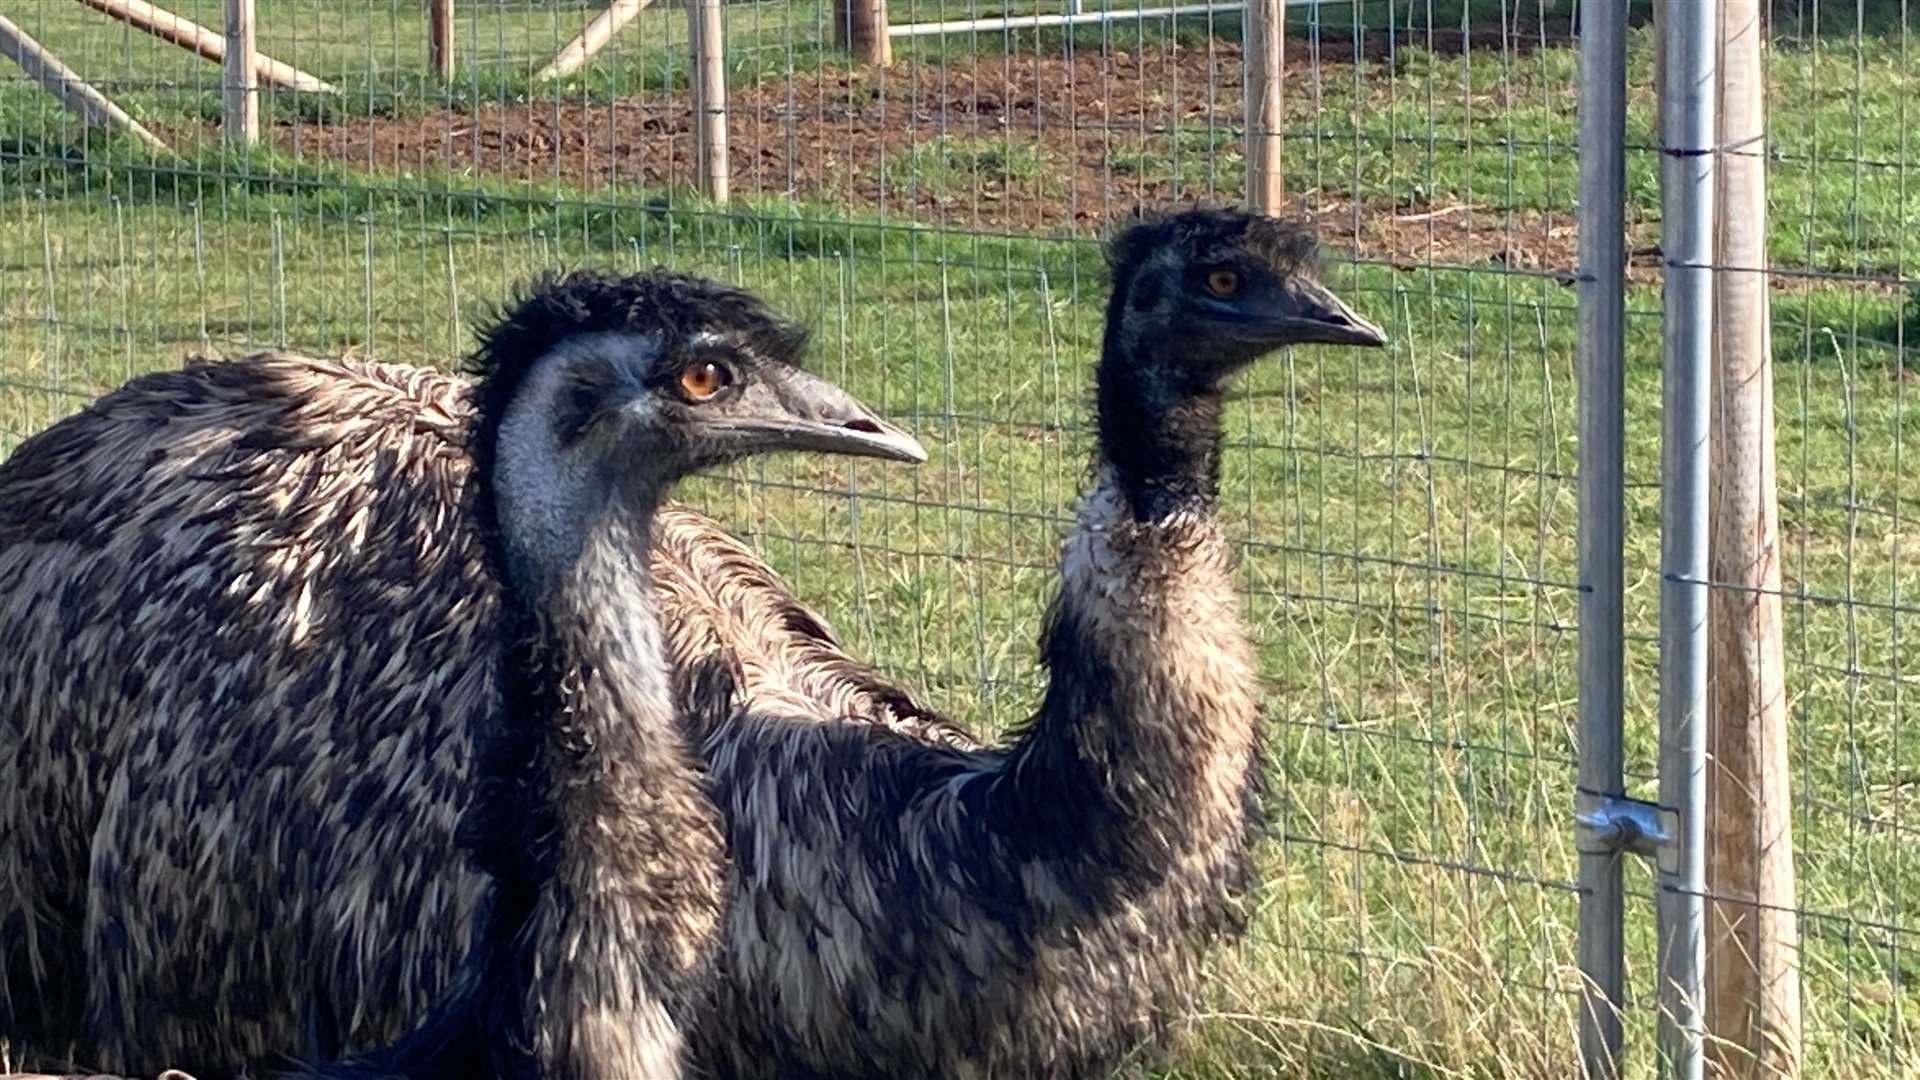 Emus Sonny and Cher at Curly's Farm